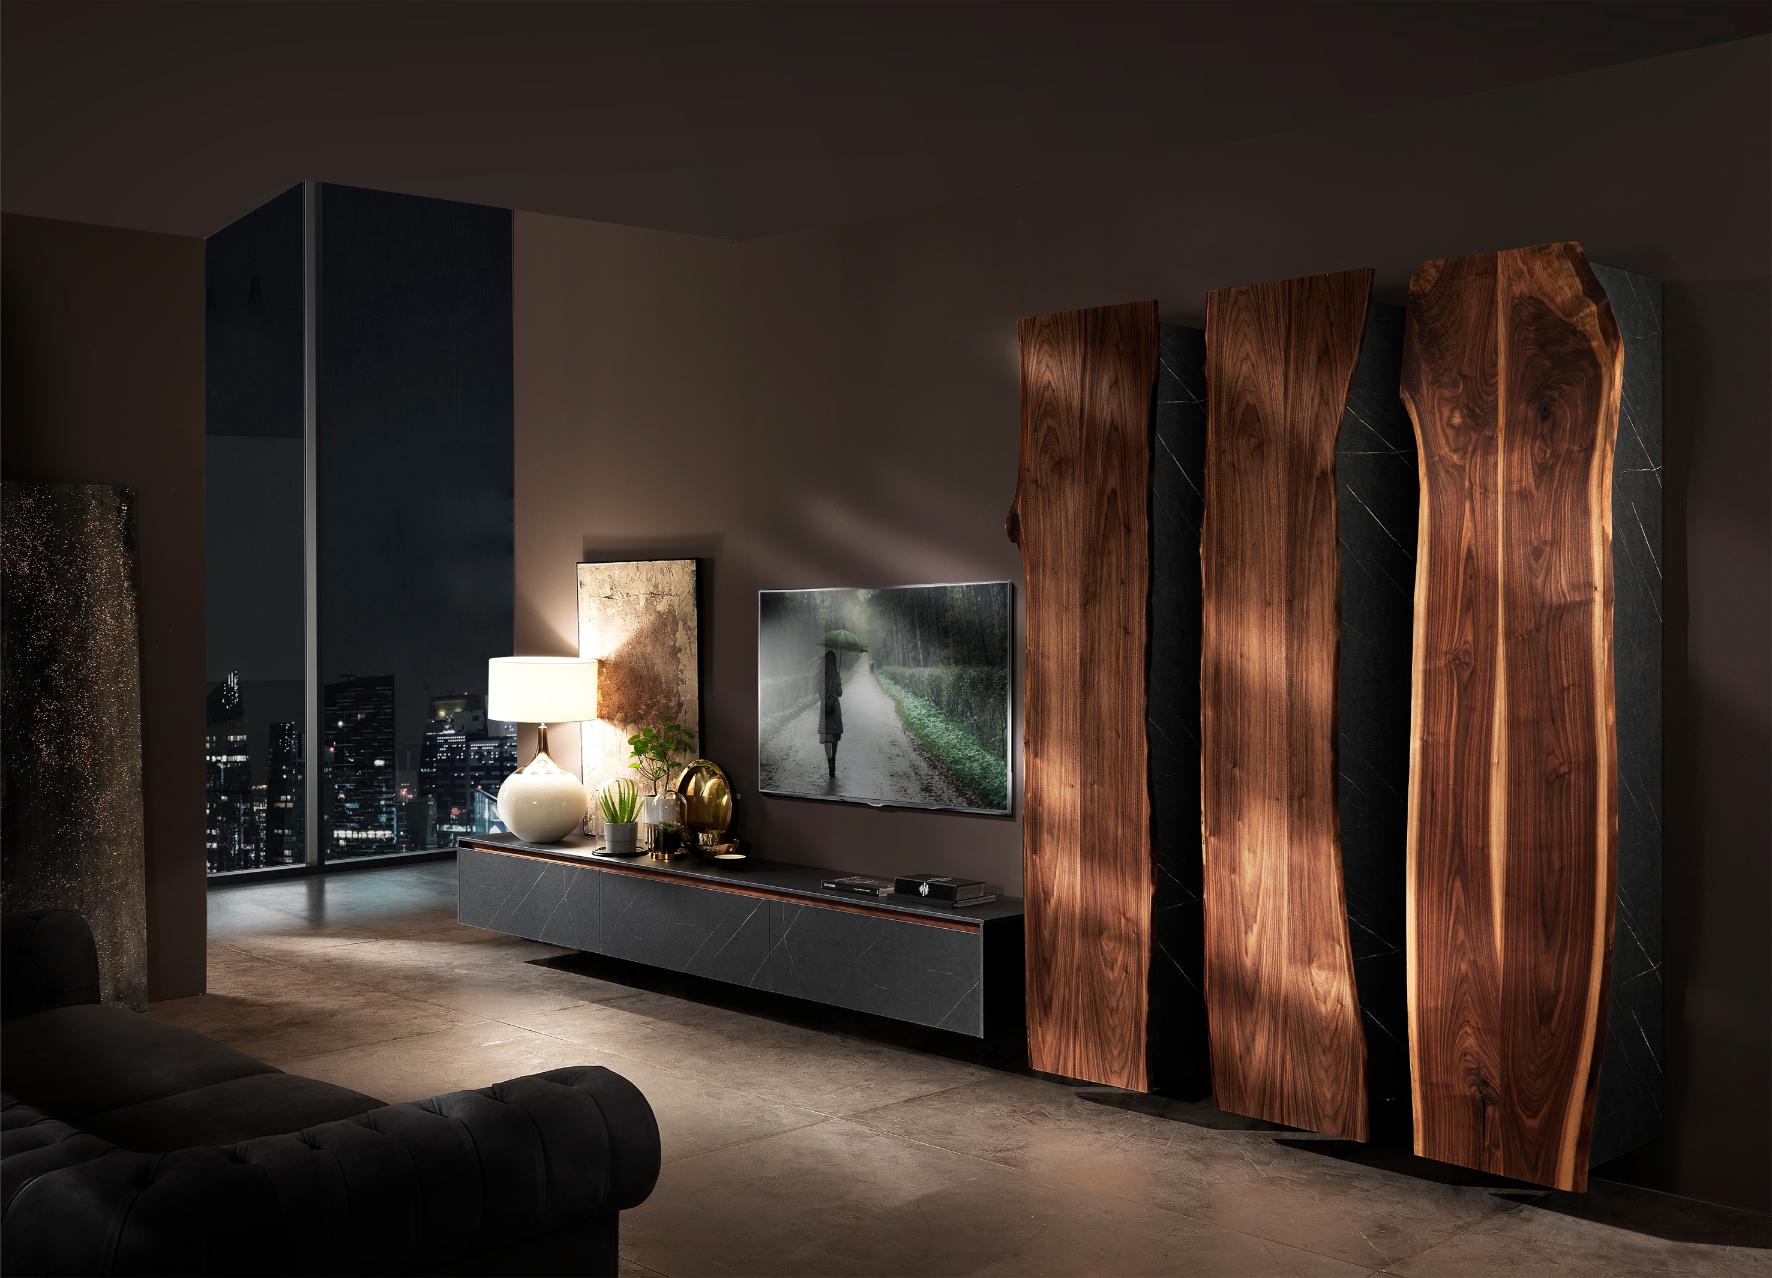 Take Me Home Set by Francesco Profili
Dimensions: W 100 x D 45 x H 38 cm (Chest of Drawers) / W 50 x D 50 x H 230 cm (Doors)
Materials: Walnut, Stone Effect

A versatile system for the living area, based on the possibility of personalising and